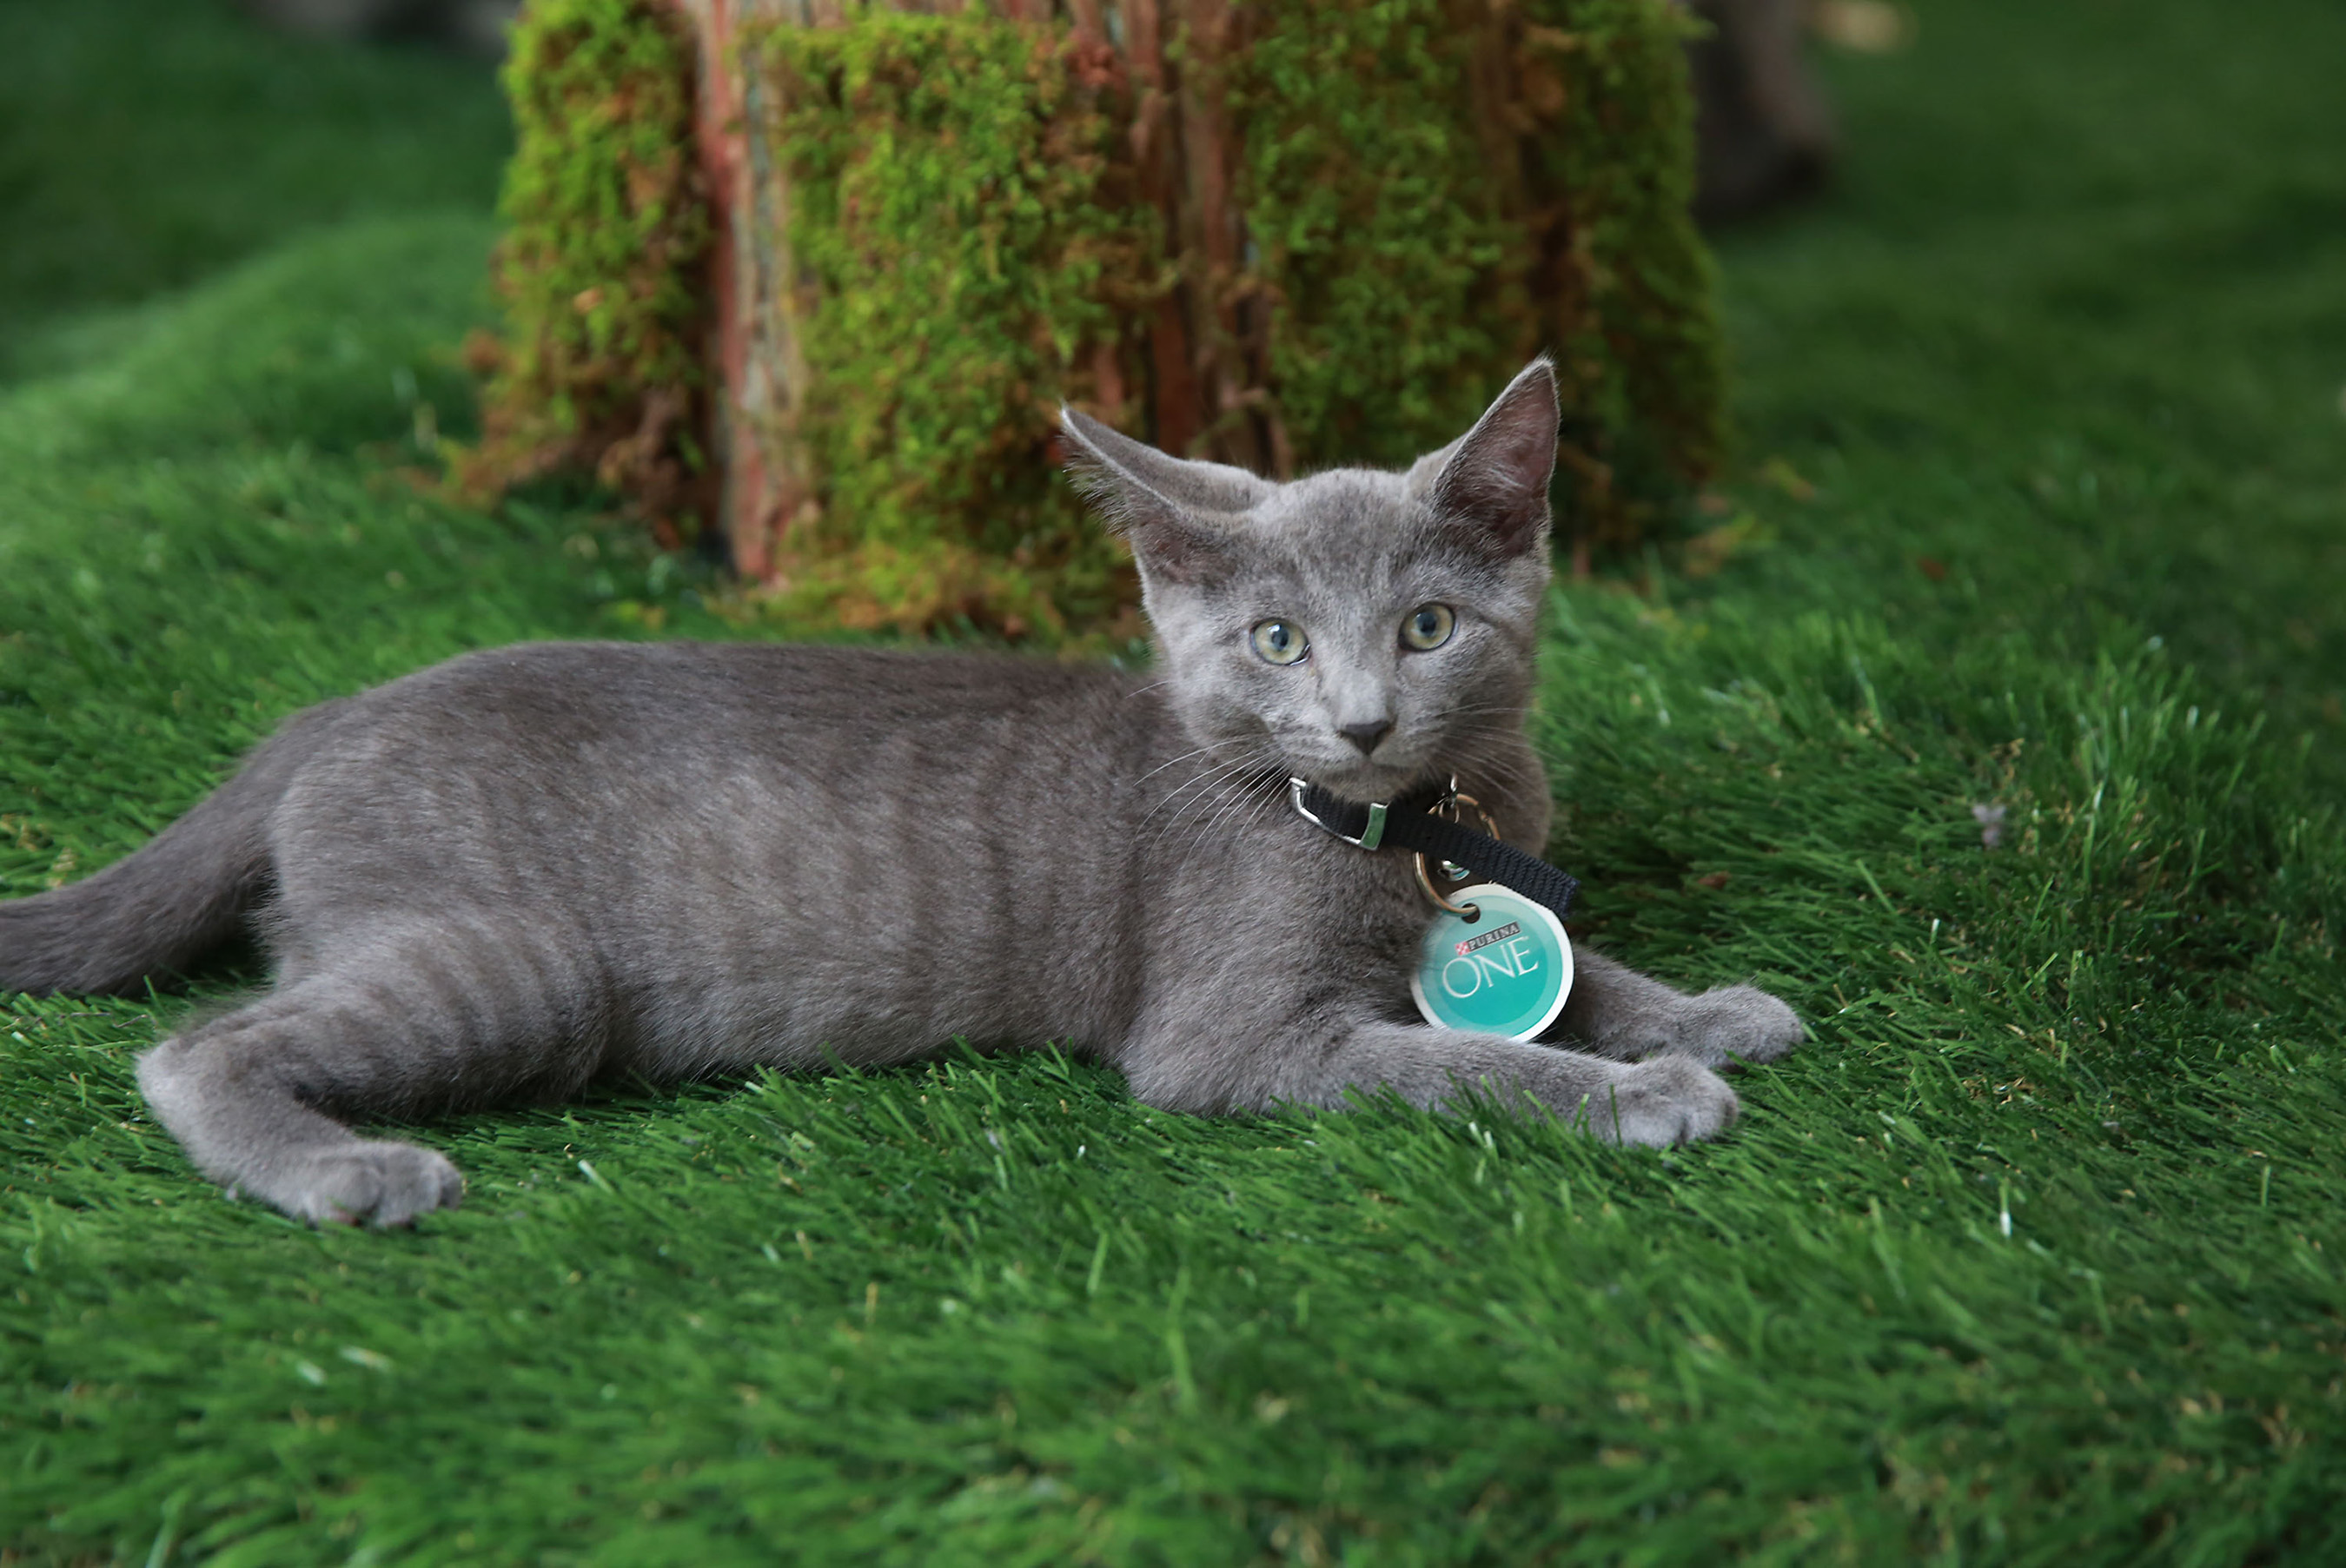 Purina ONE brings adoptable cats and cat lovers together for the first-ever Cat Camp, to experience what whole body health means for cats, on Thursday, July 30, 2015 in New York. (Photo by Amy Sussman/Invision for Purina ONE/AP Images)